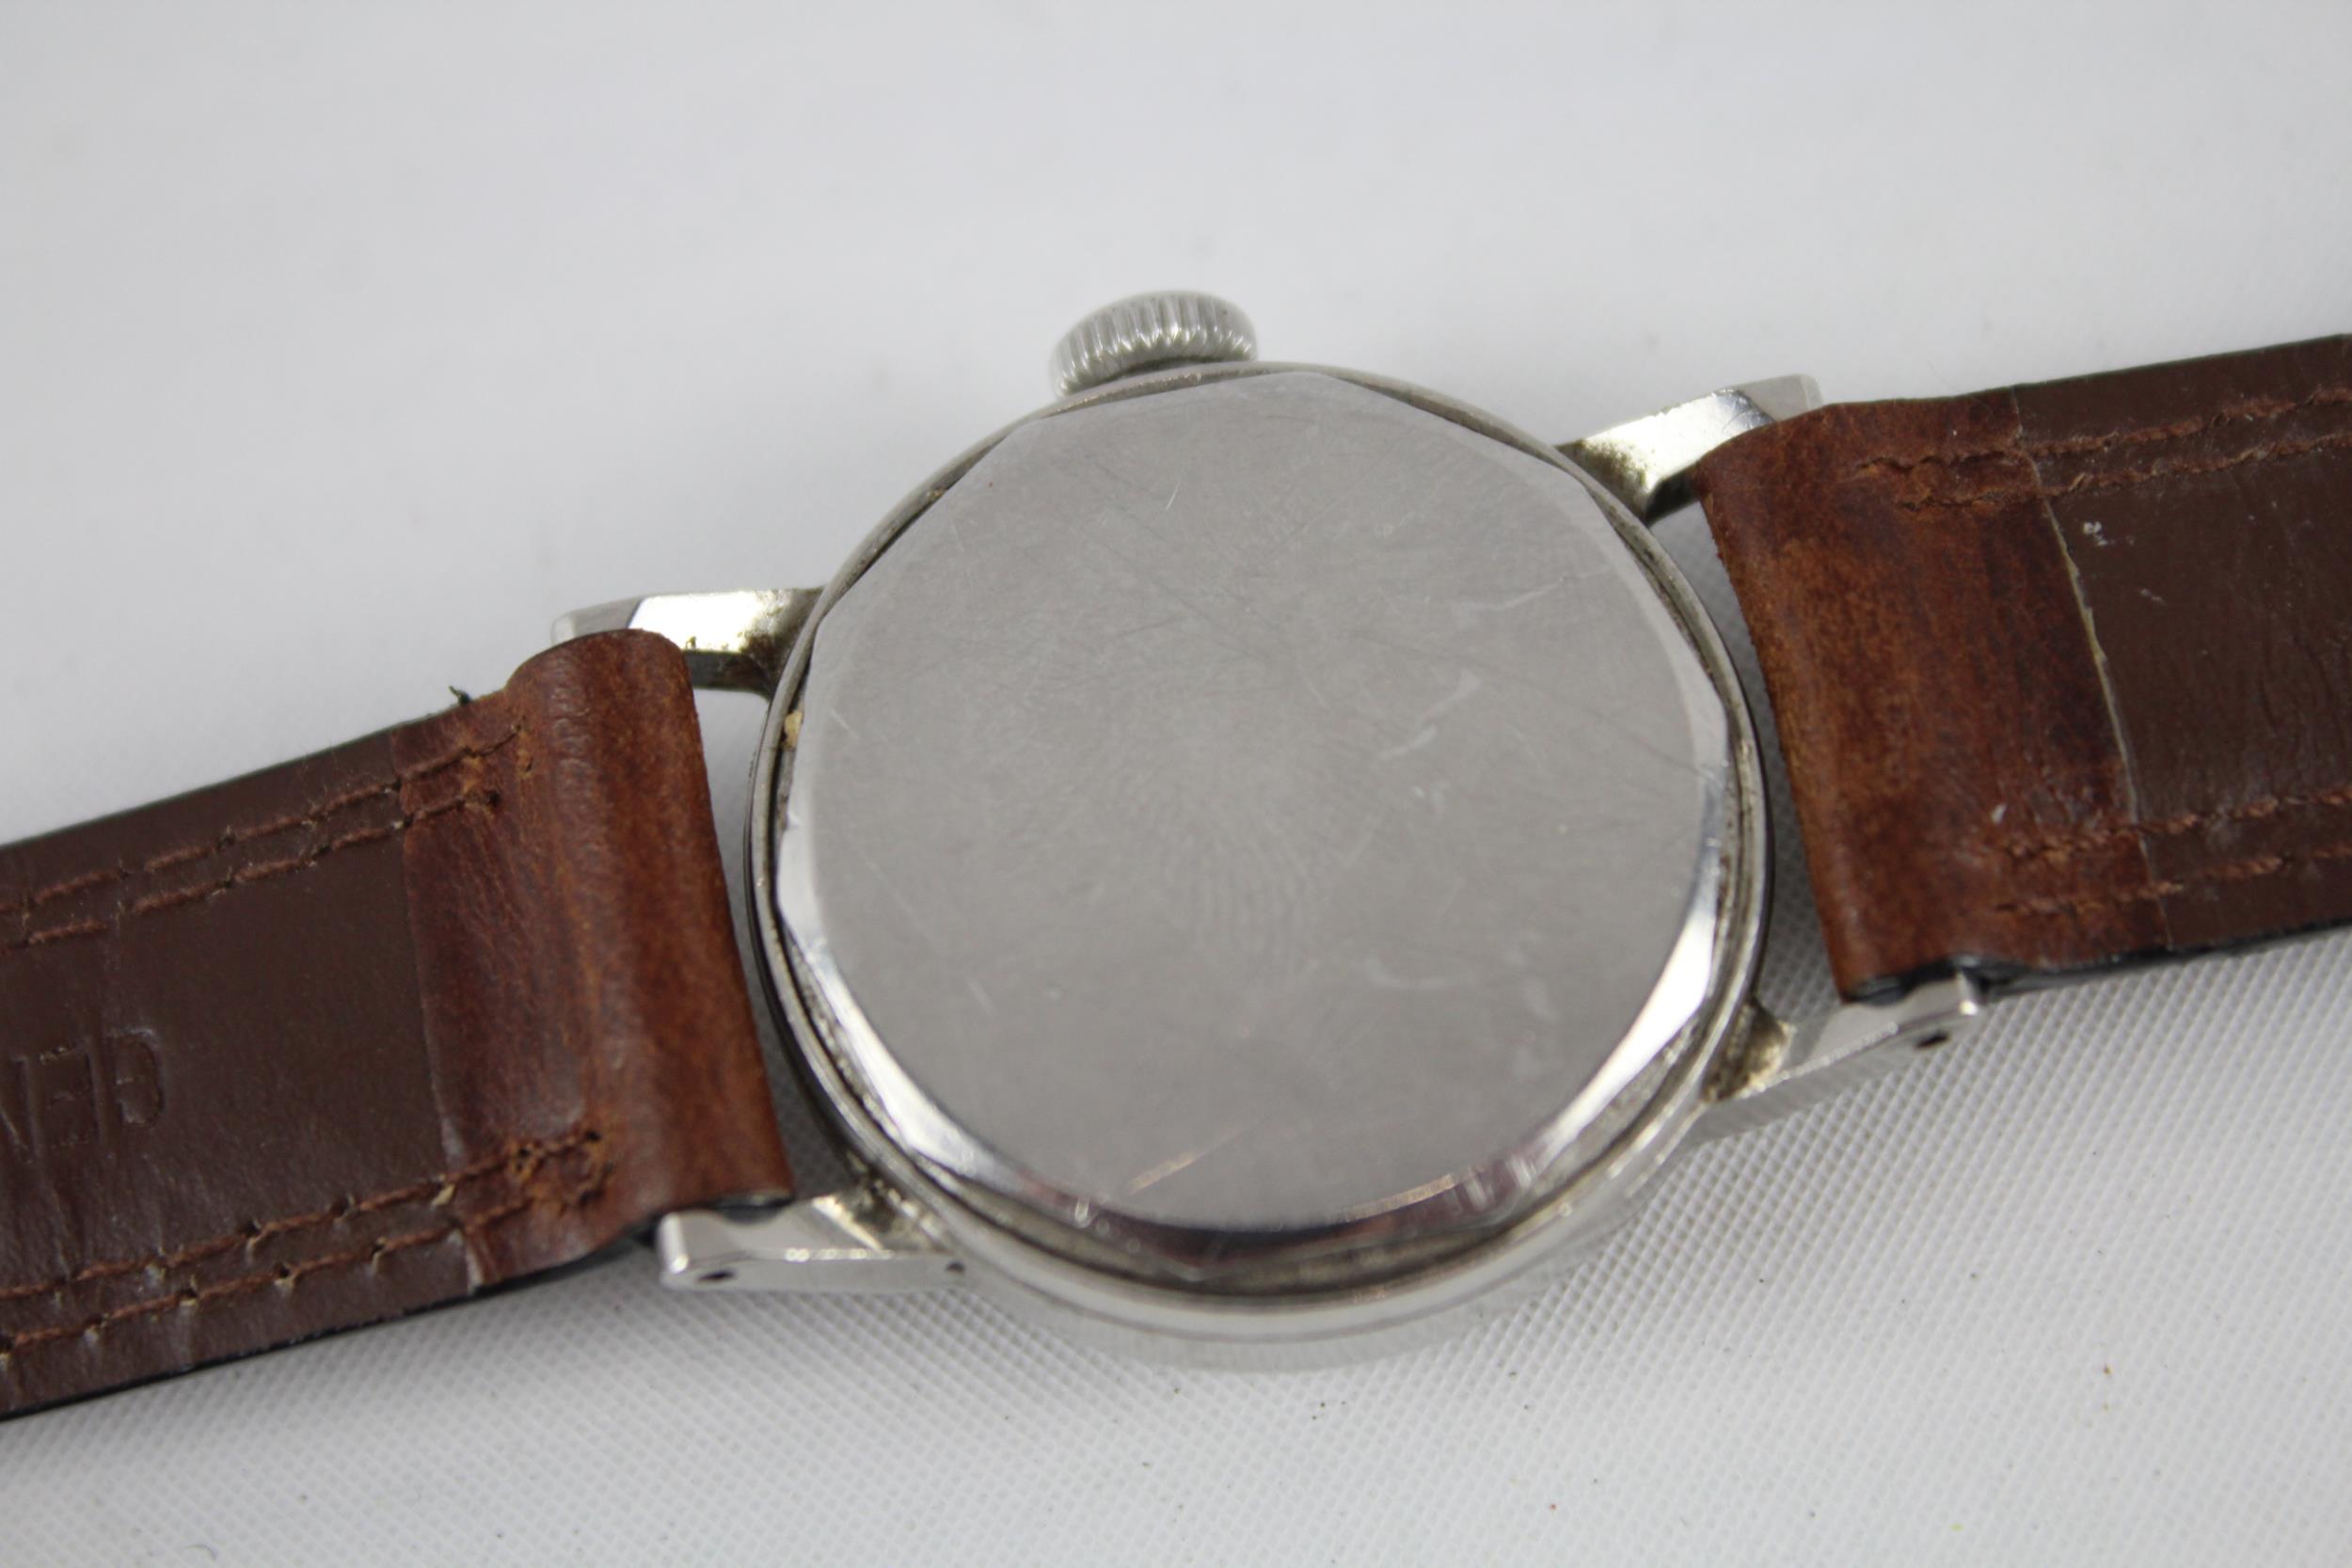 MOVADO Gents Military Style C.1940s WRISTWATCH Hand-wind WORKING // MOVADO Gents Military Style C. - Image 5 of 5